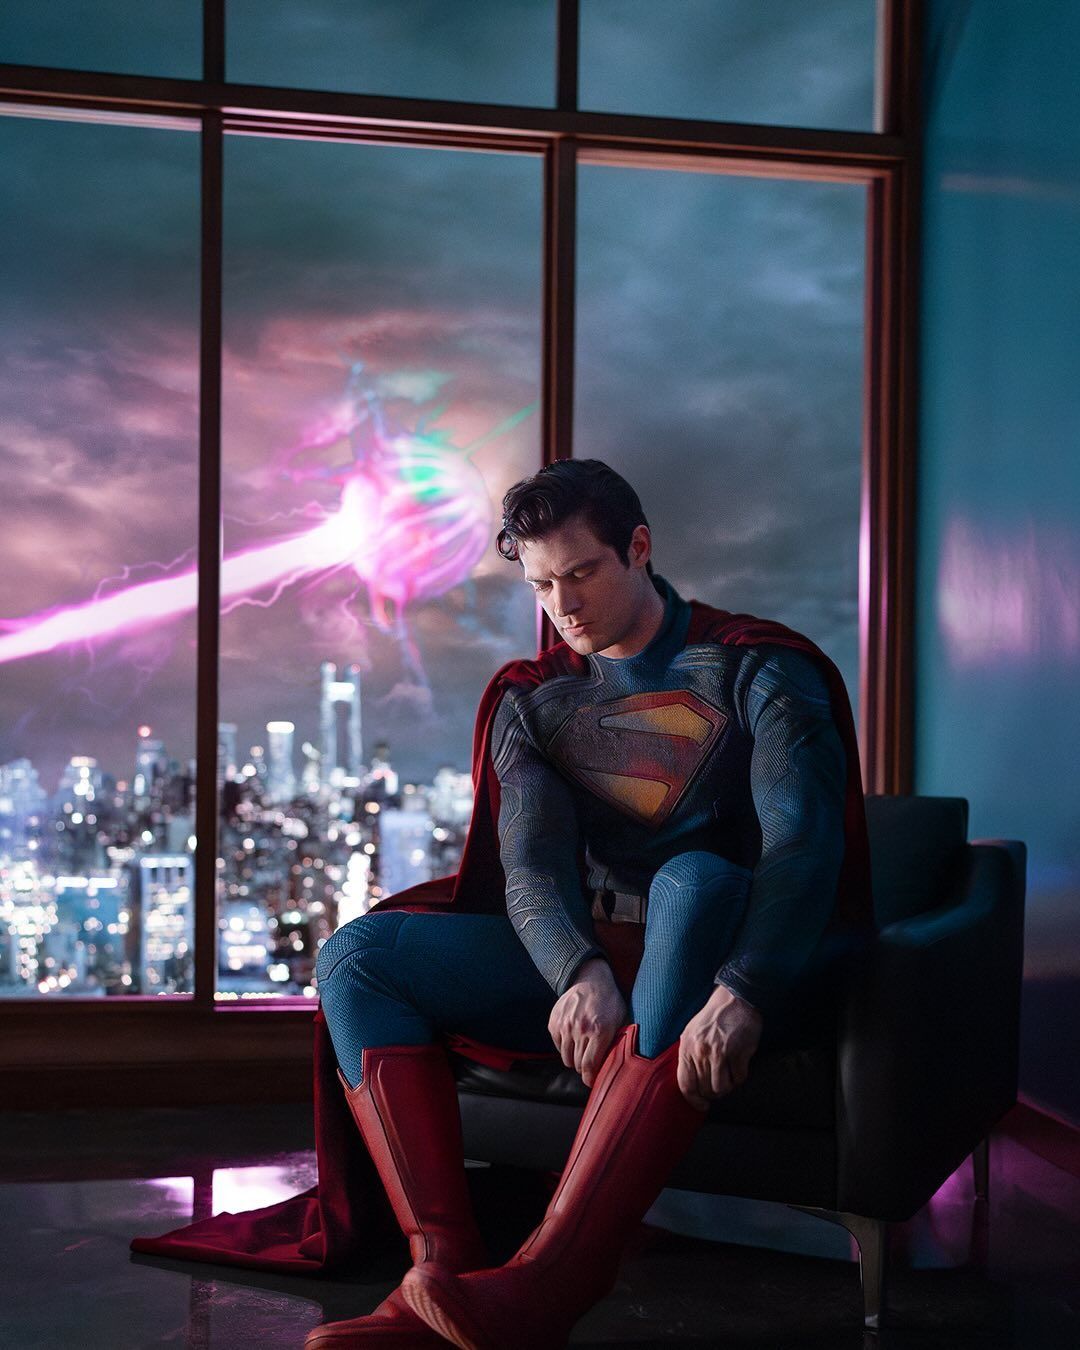 David Corenswet As Superman First Image Revealed: Battered Costume, Bright Red Boots… And An Alien Attack In The Sky